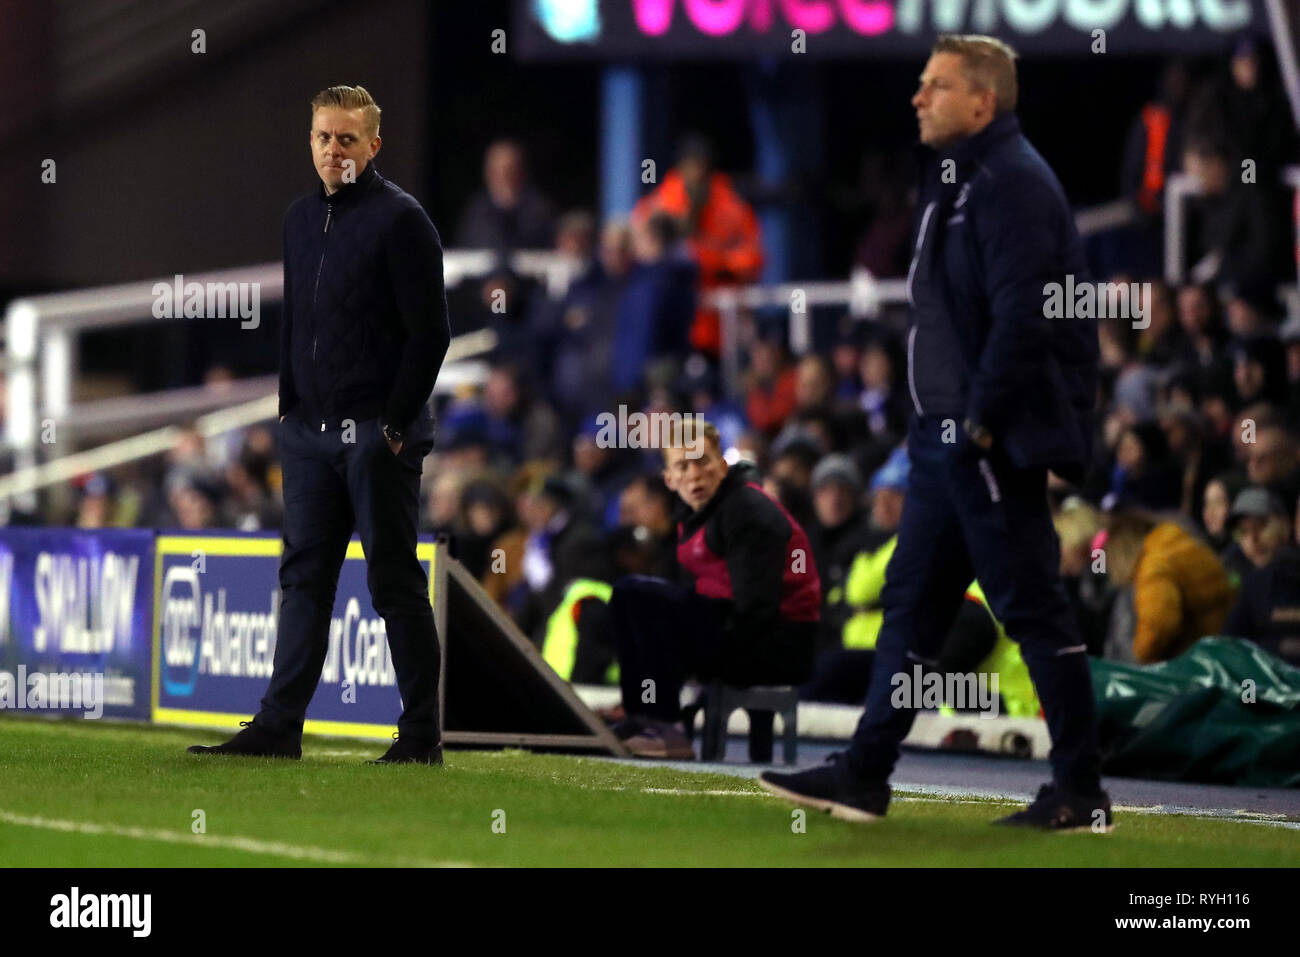 Birmingham City manager Garry Monk (left) and Millwall manager Neil Harris watch match action on the touchline during the Sky Bet Championship match at St Andrew's Trillion Trophy Stadium, Birmingham. Stock Photo